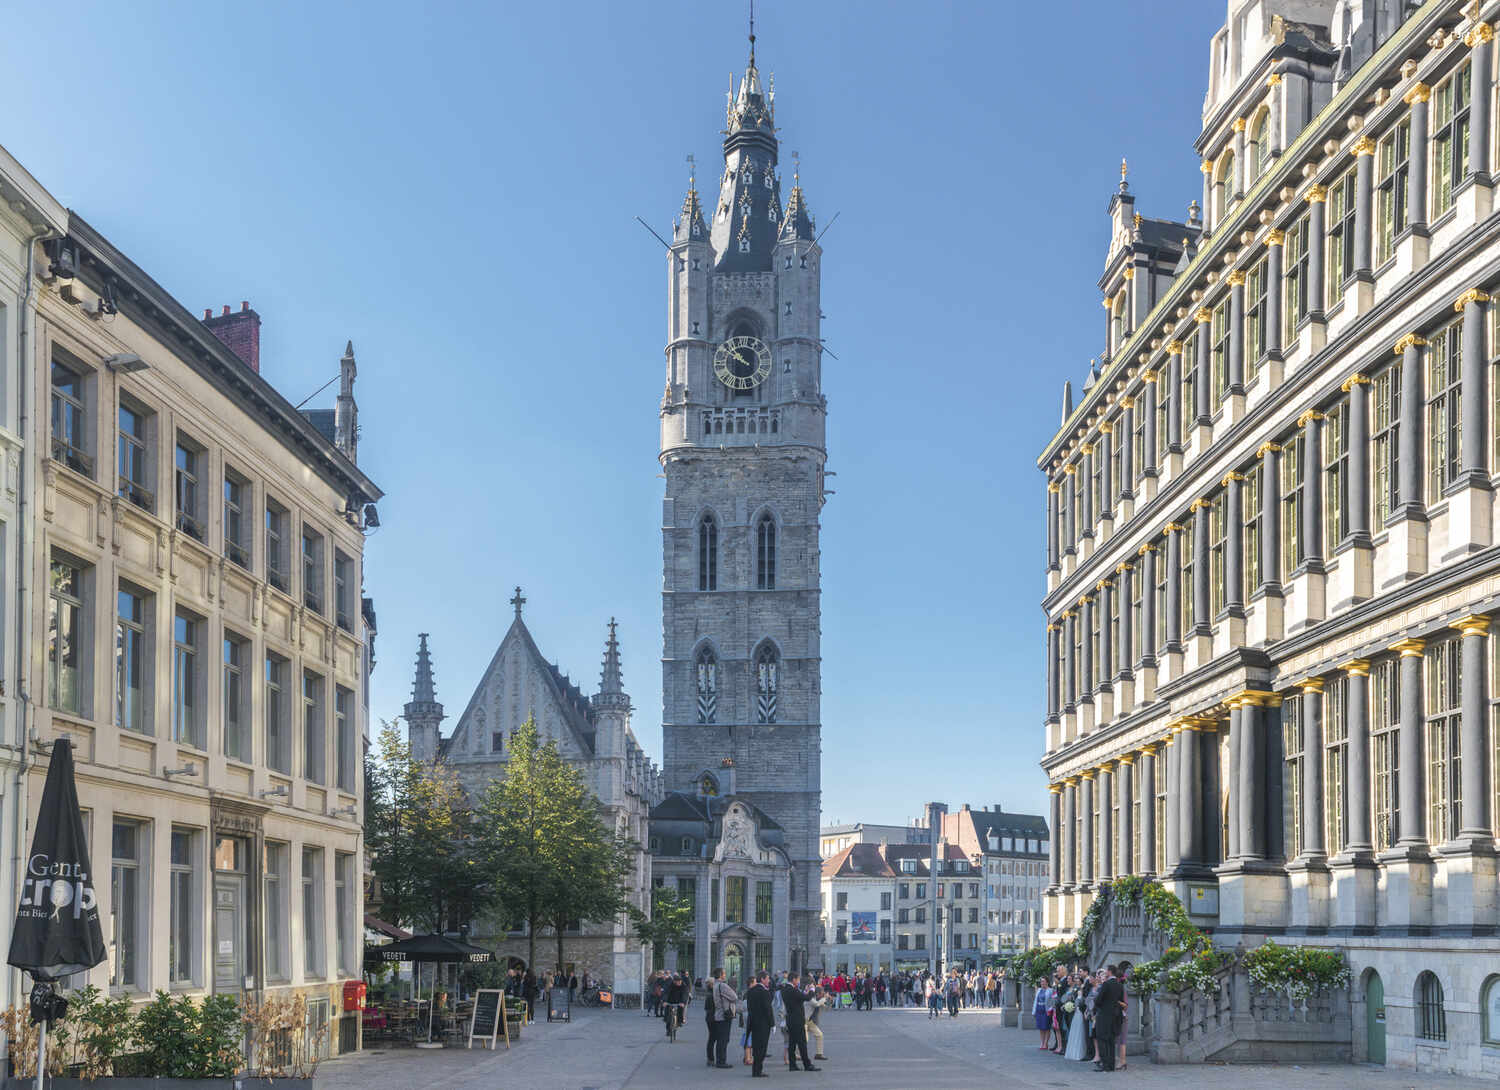 Belfry tower in Ghent on a sunny day